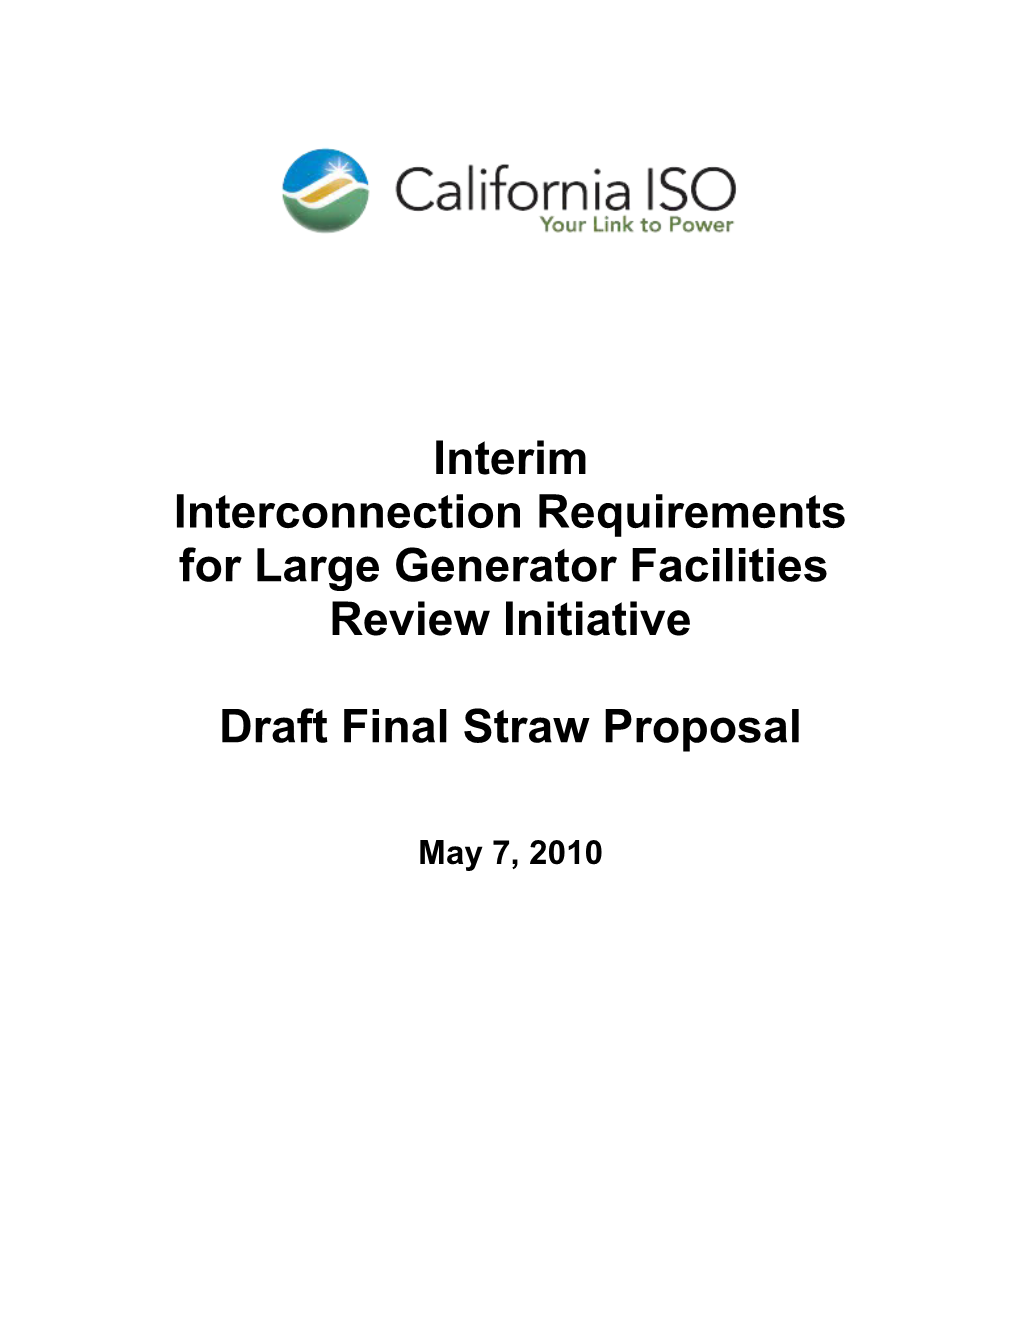 Second Revised Draft Final Straw Proposal - Interim Interconnection Requirements for Large